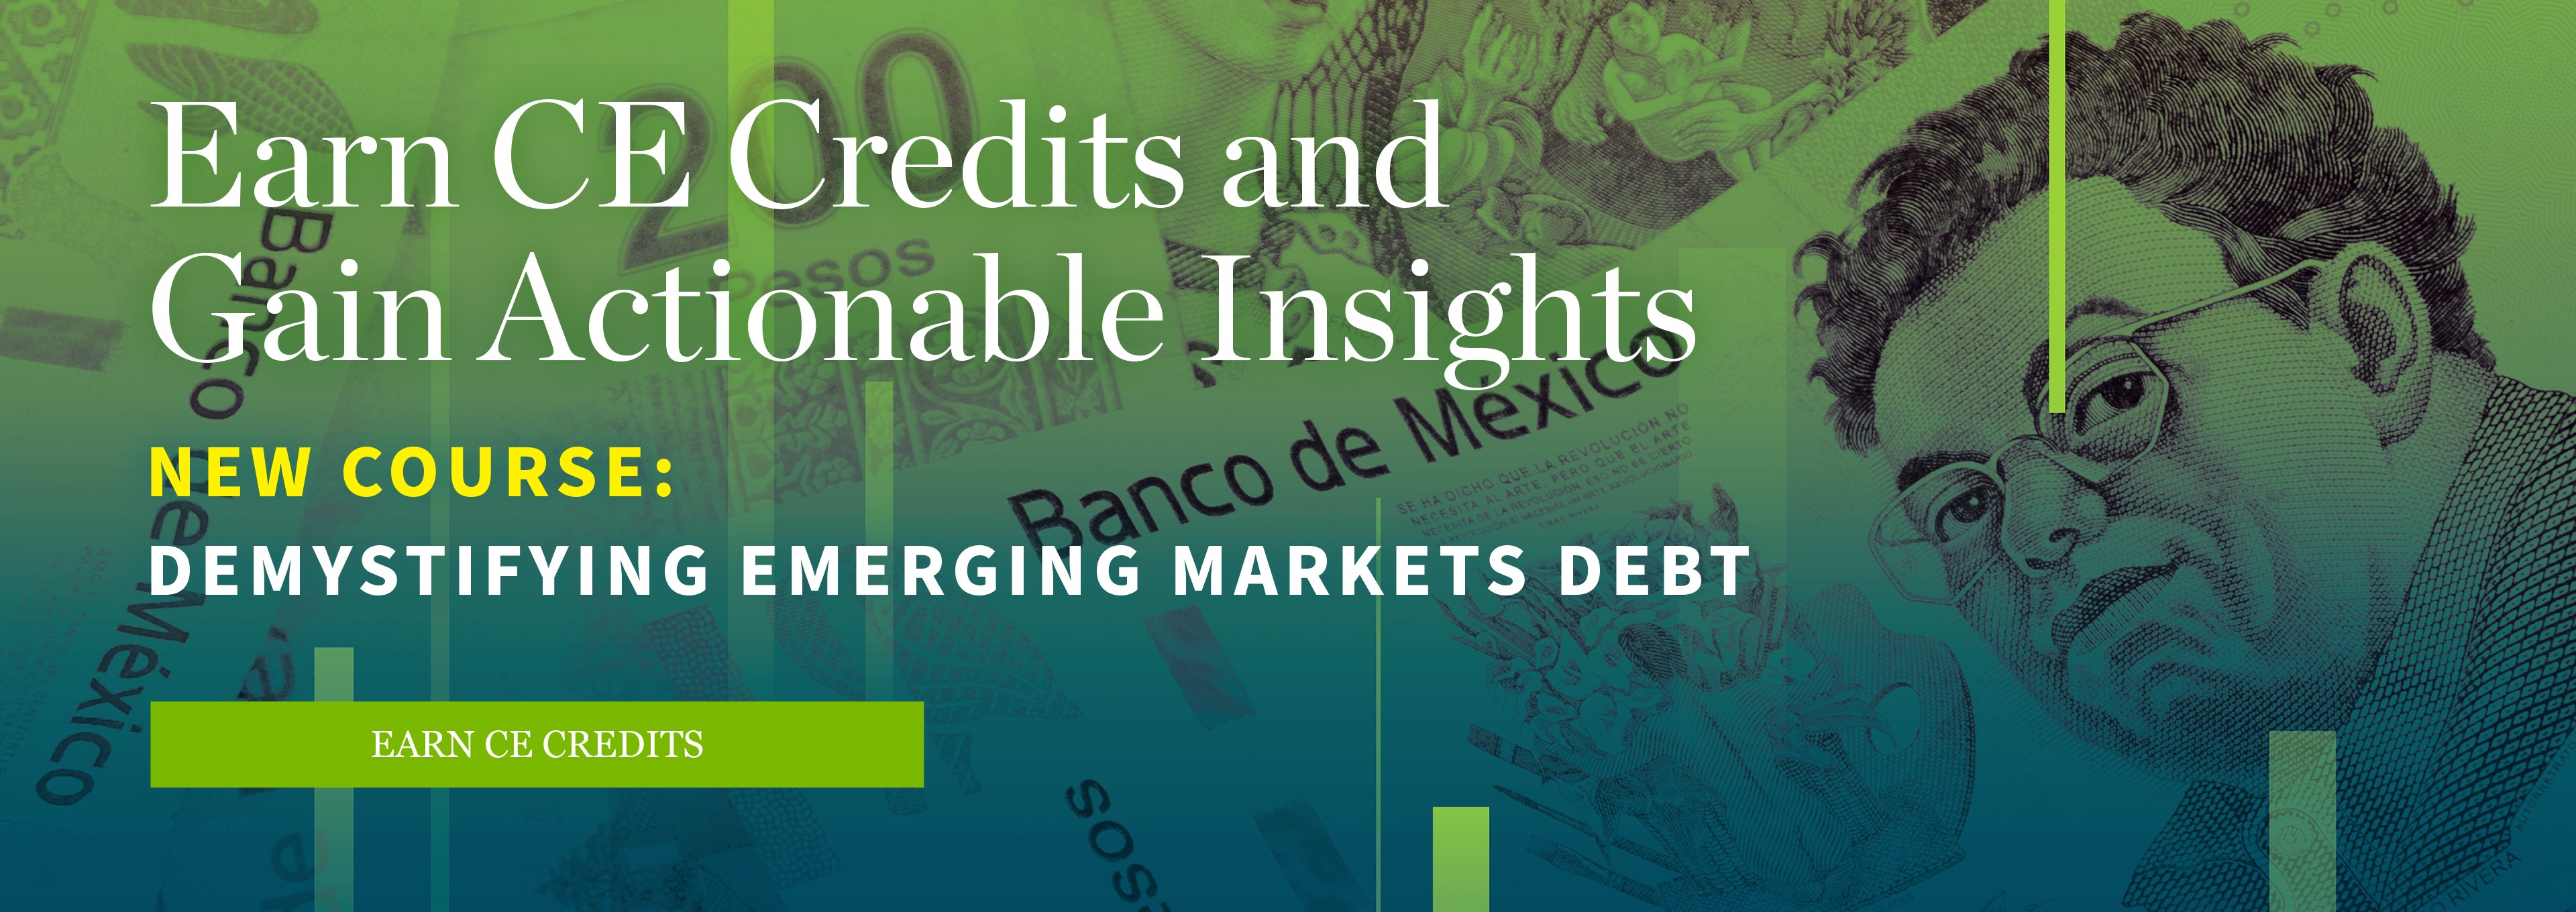 Earn CE Credits and Gain Actionable Insights | New Course: Demystifying Emerging Markets Debt